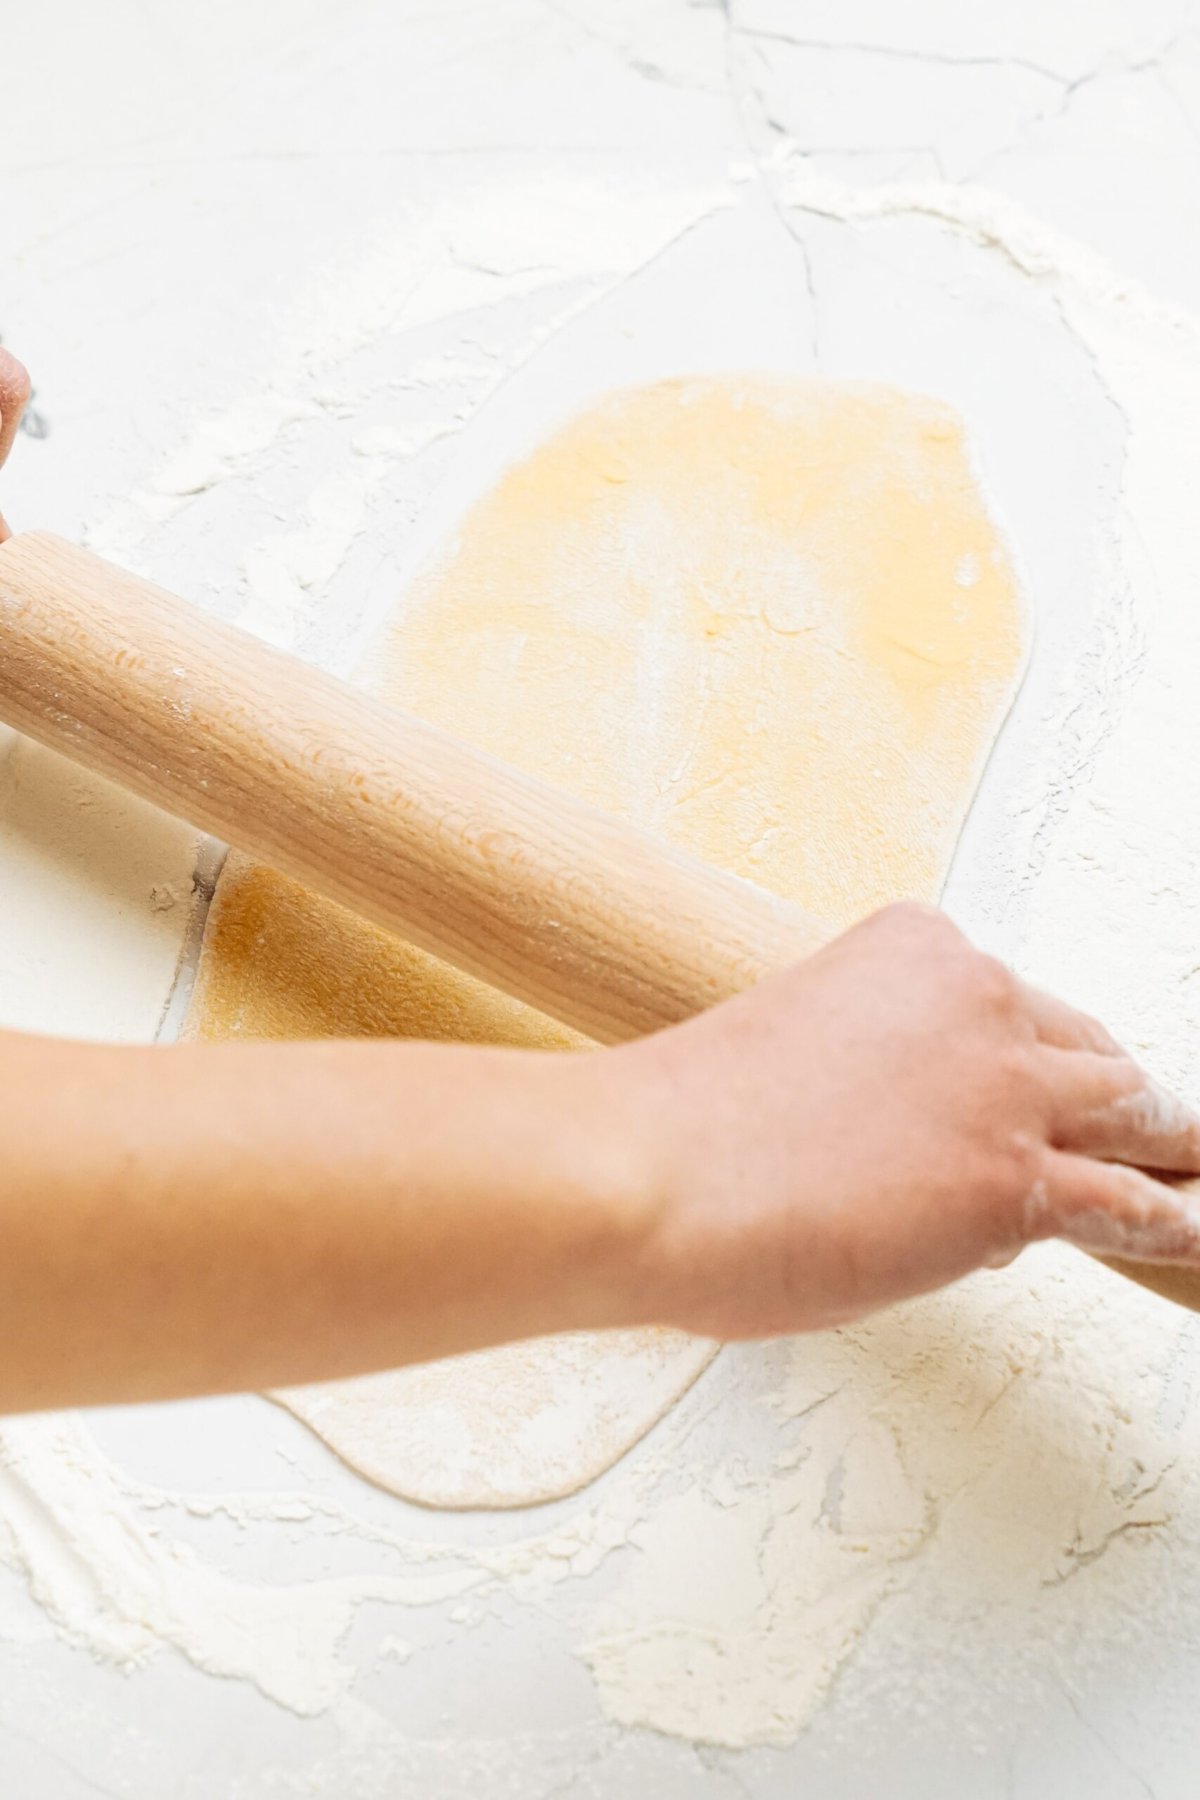 A person rolling out dough on a white surface.